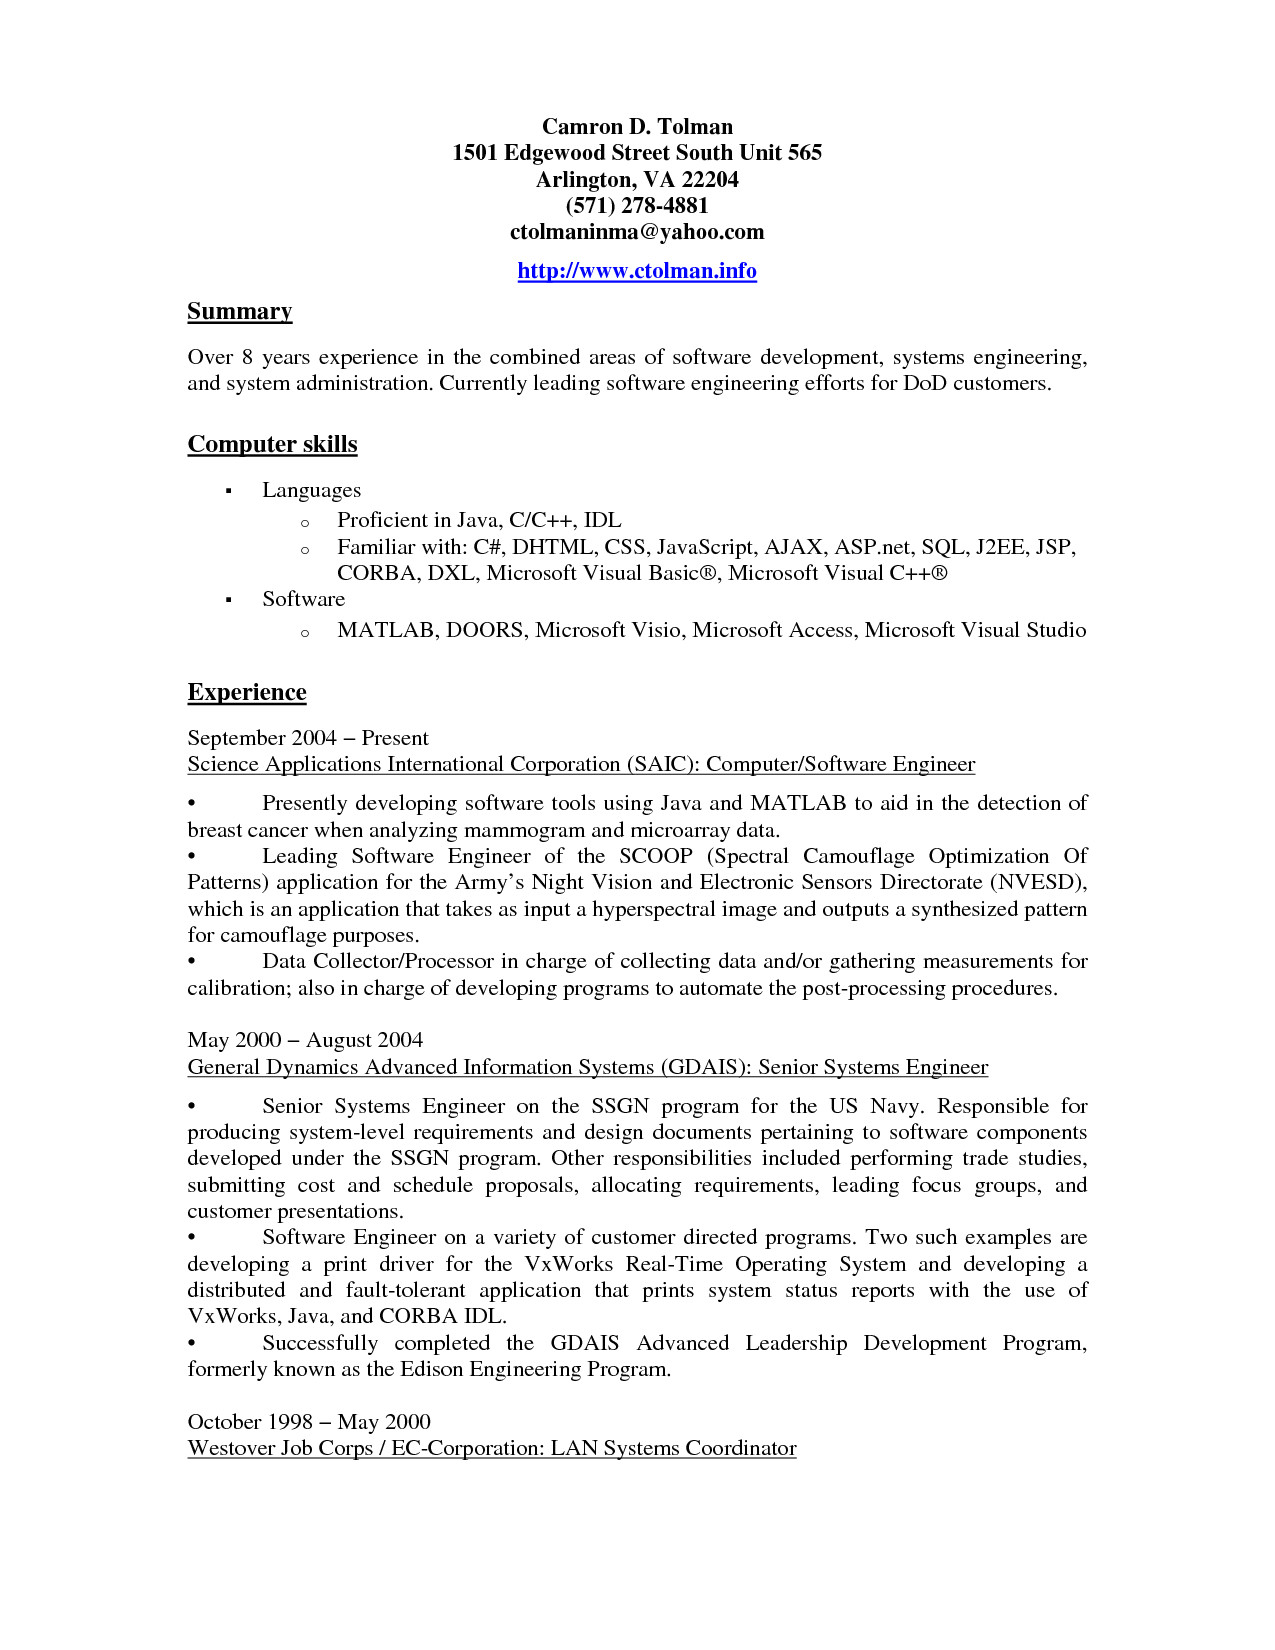 resume summary examples for management